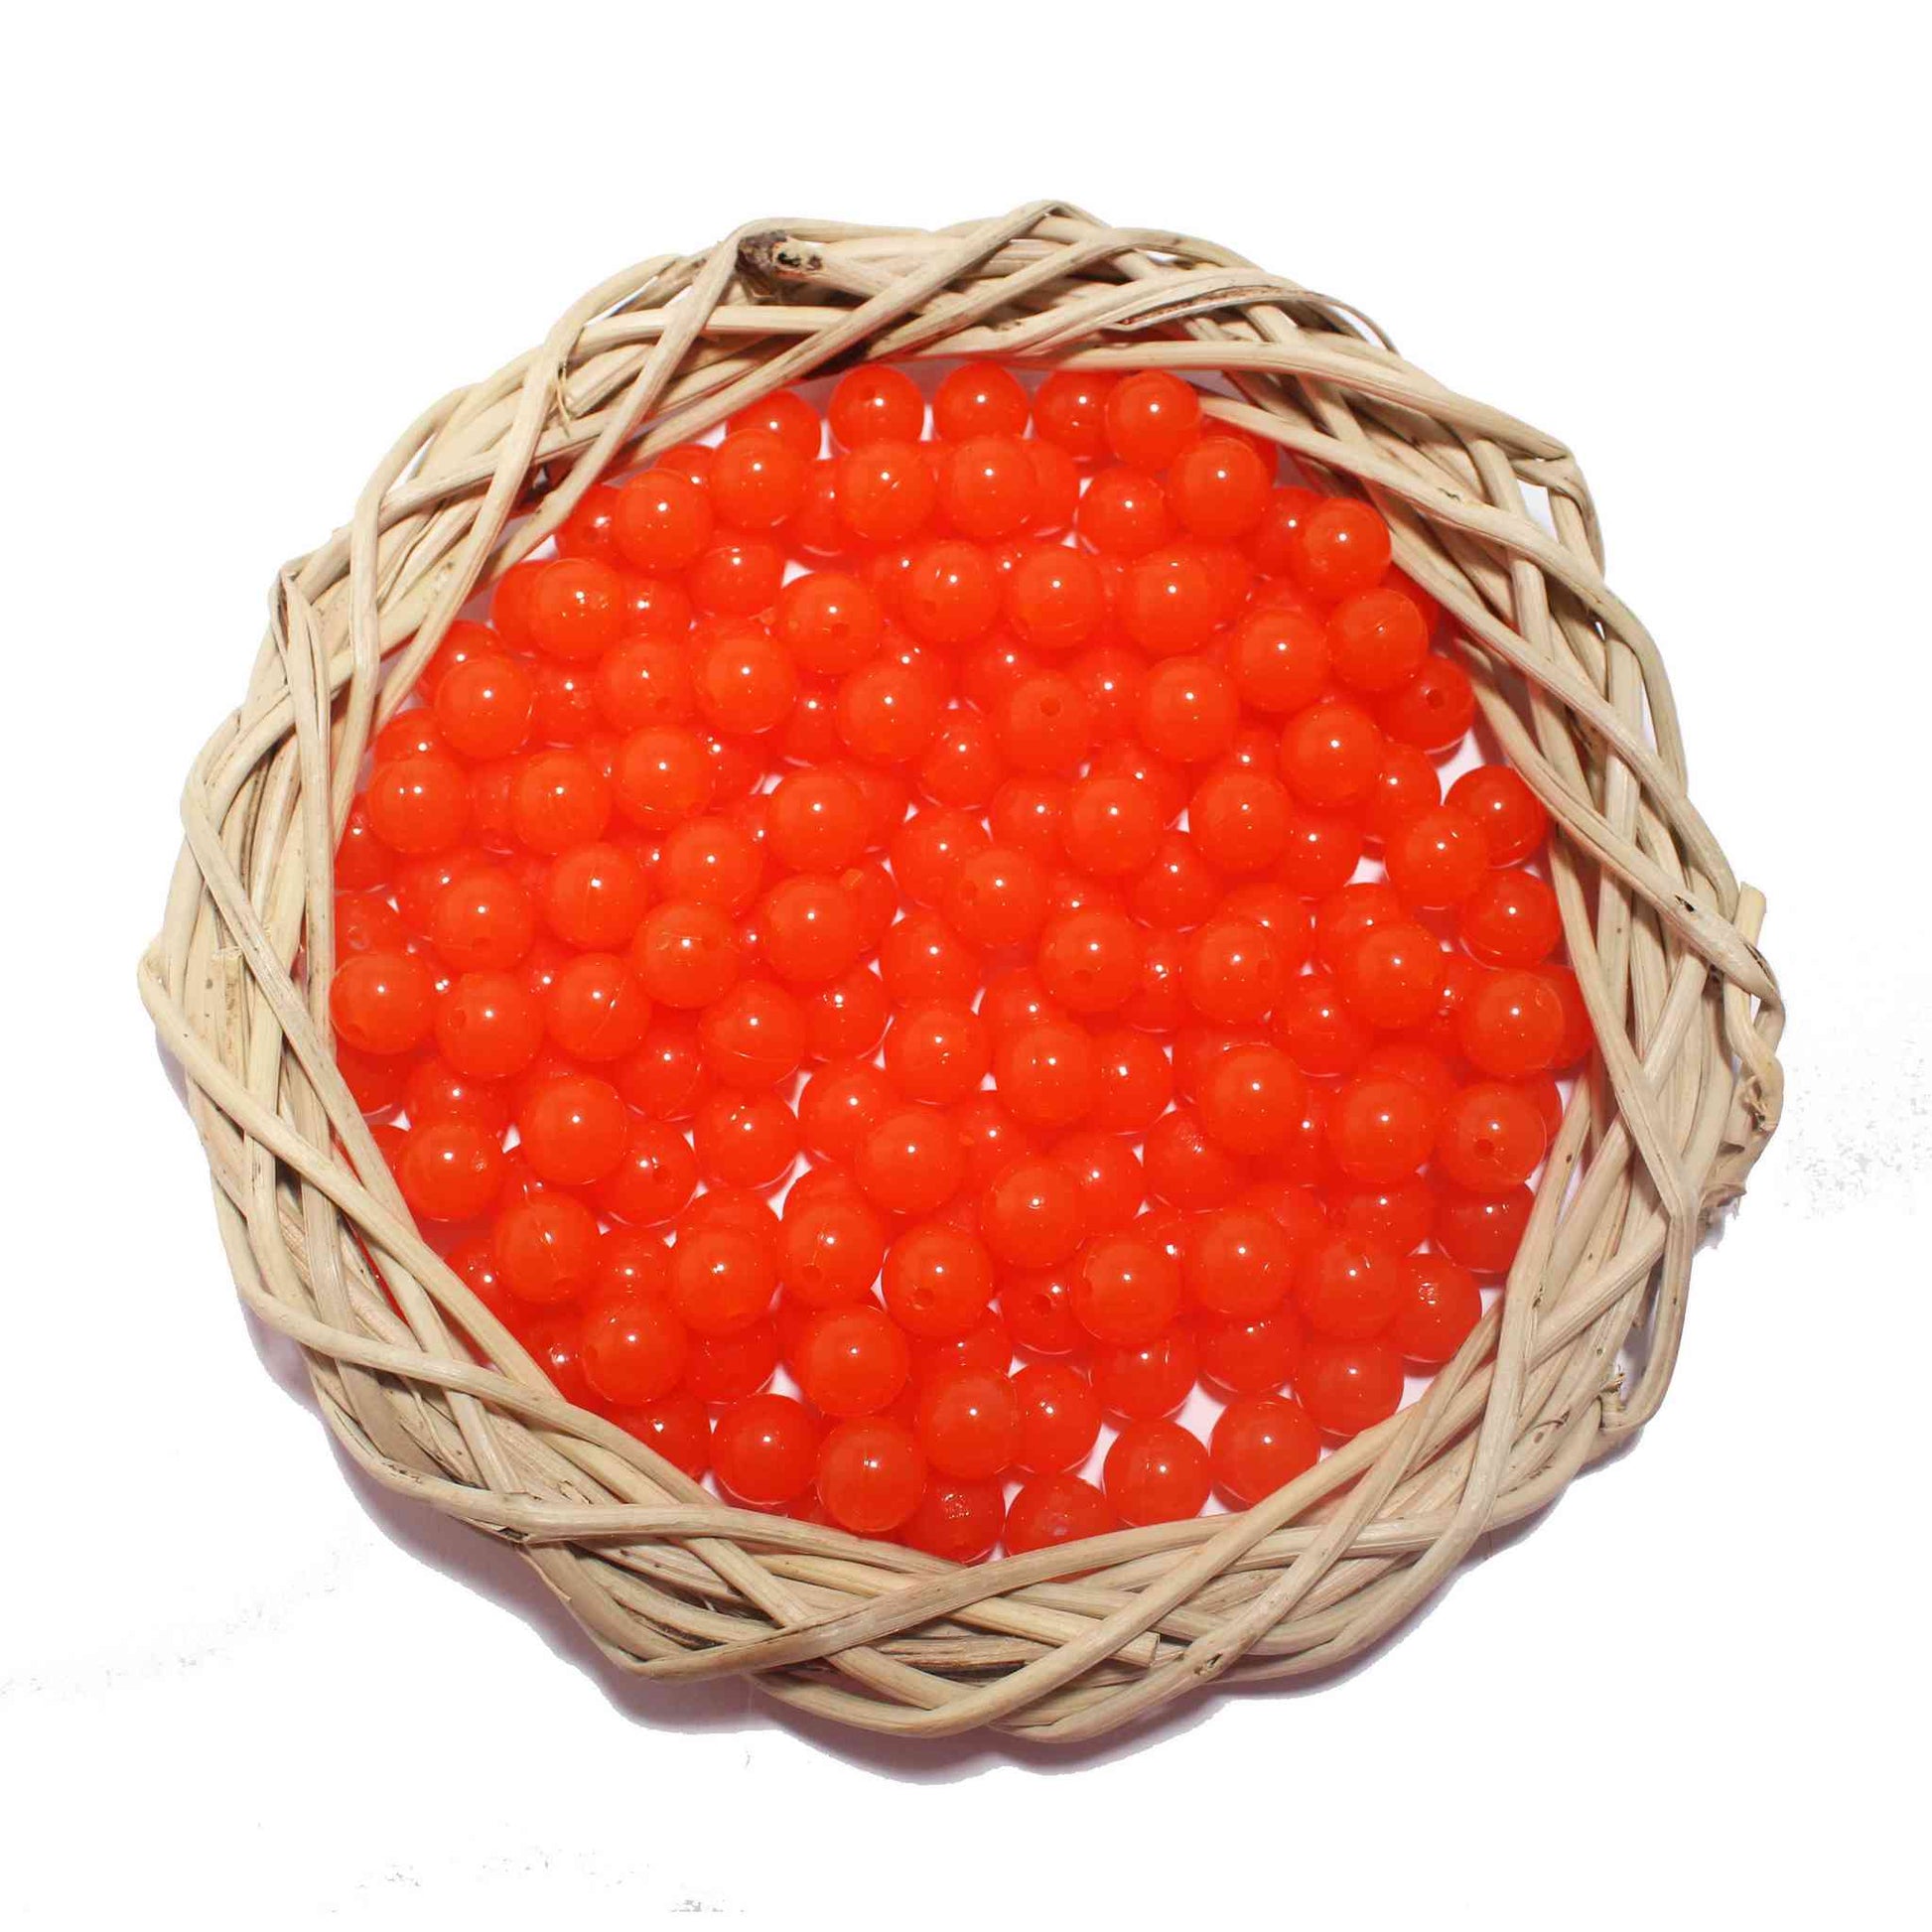 Premium quality Round Glass Beads for DIY Craft, Trousseau Packing or Decoration - Design 734, Tomato - Indian Petals